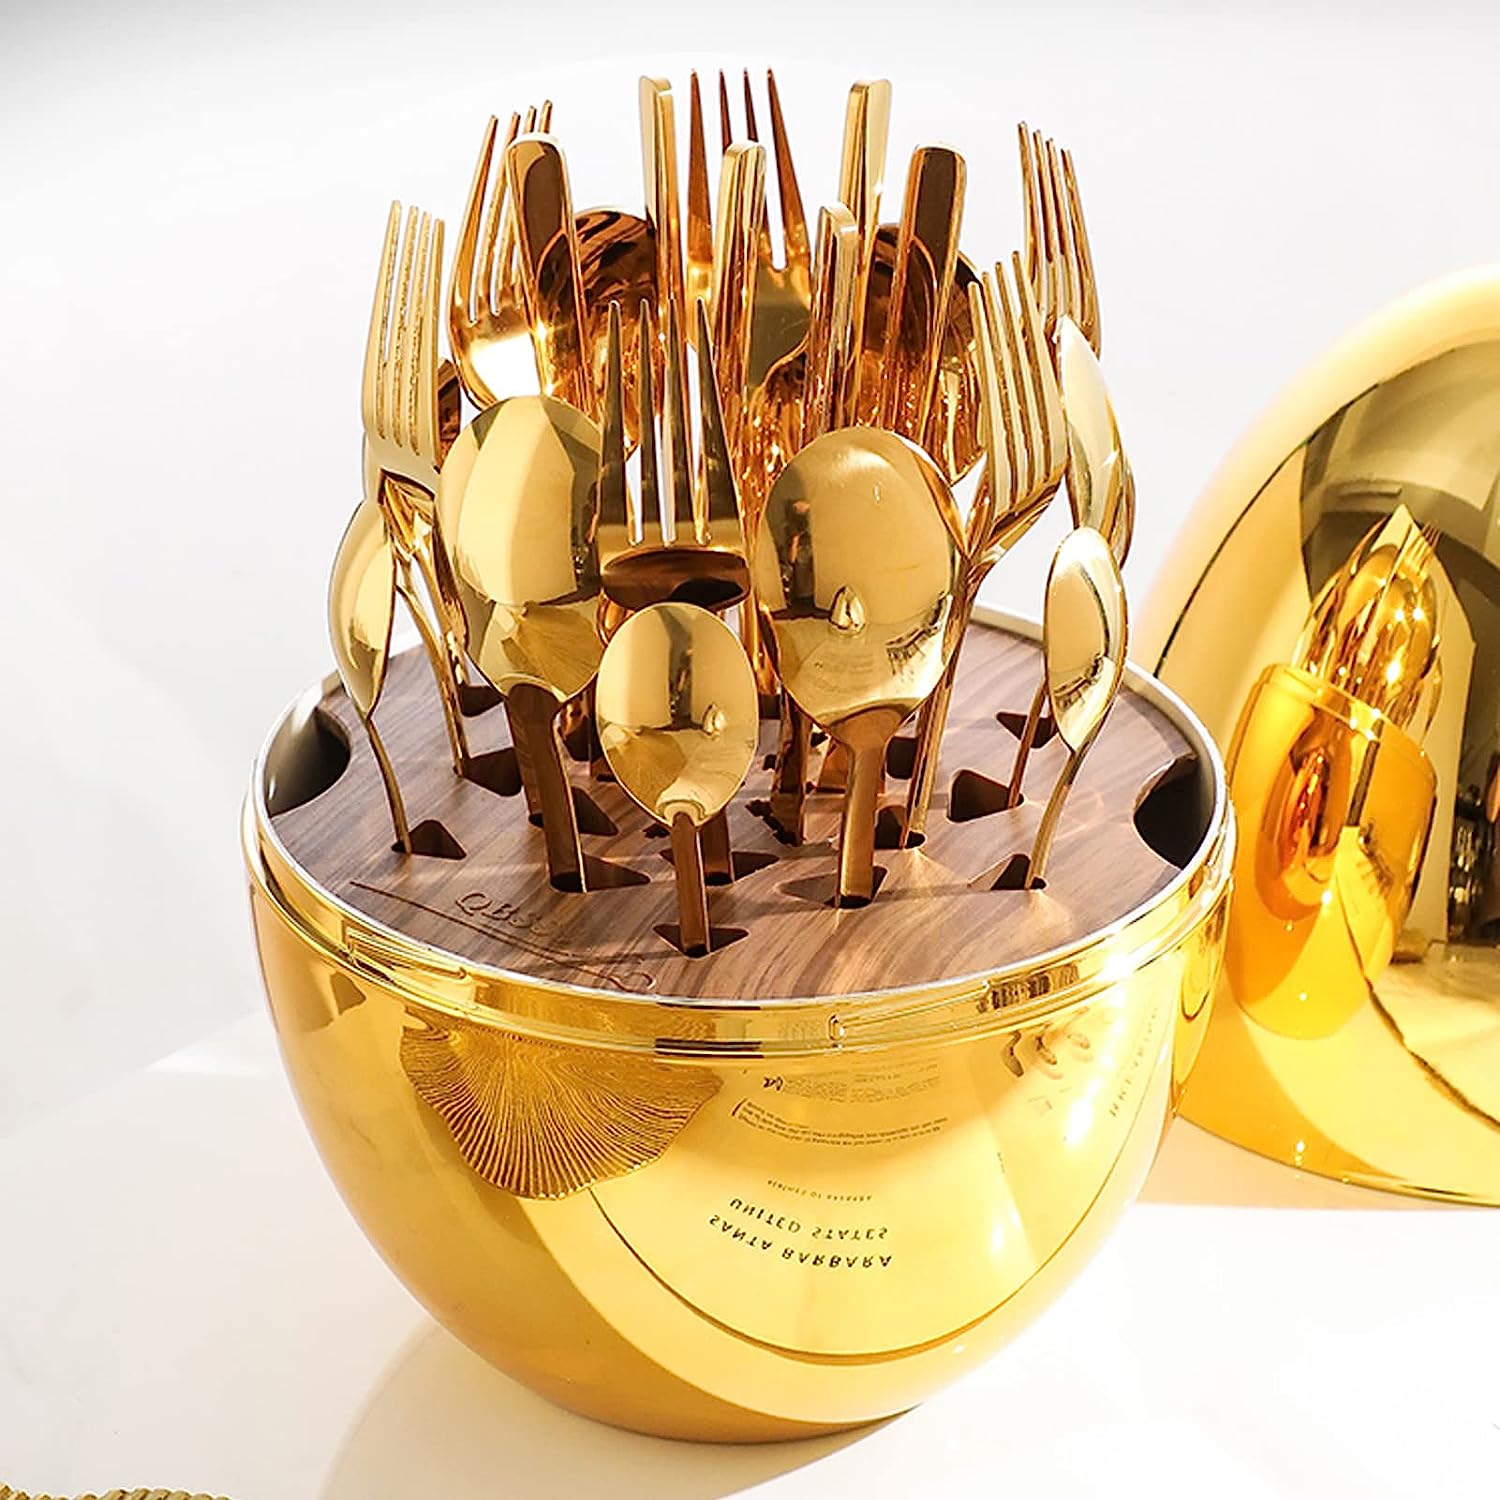 Egg-Shaped Cutlery Organizer with Storage in golden color